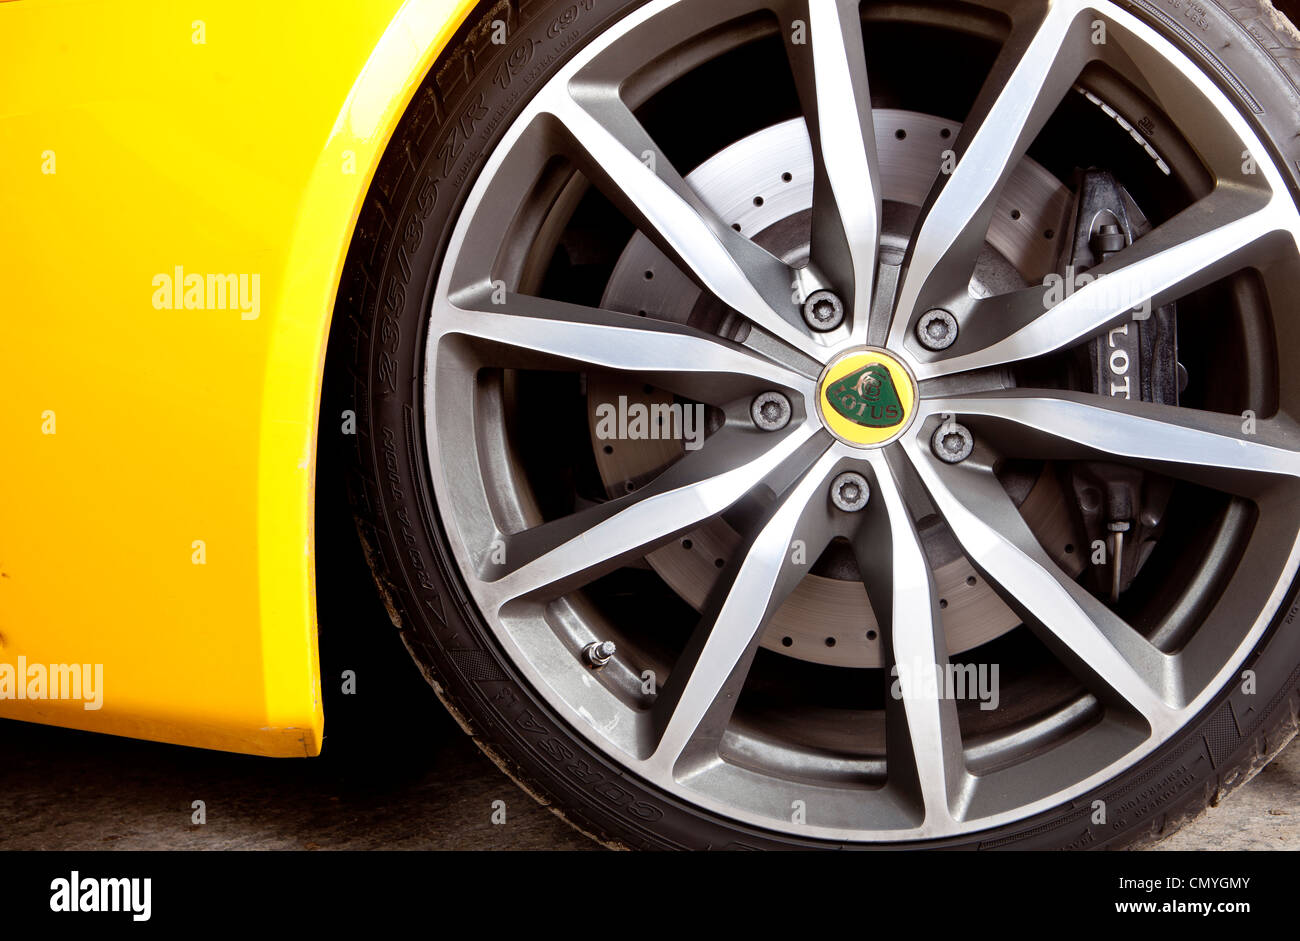 Yellow Lotus Evora sports car wheel in England, UK. The fast two seater supercar is made in Norfolk. Stock Photo